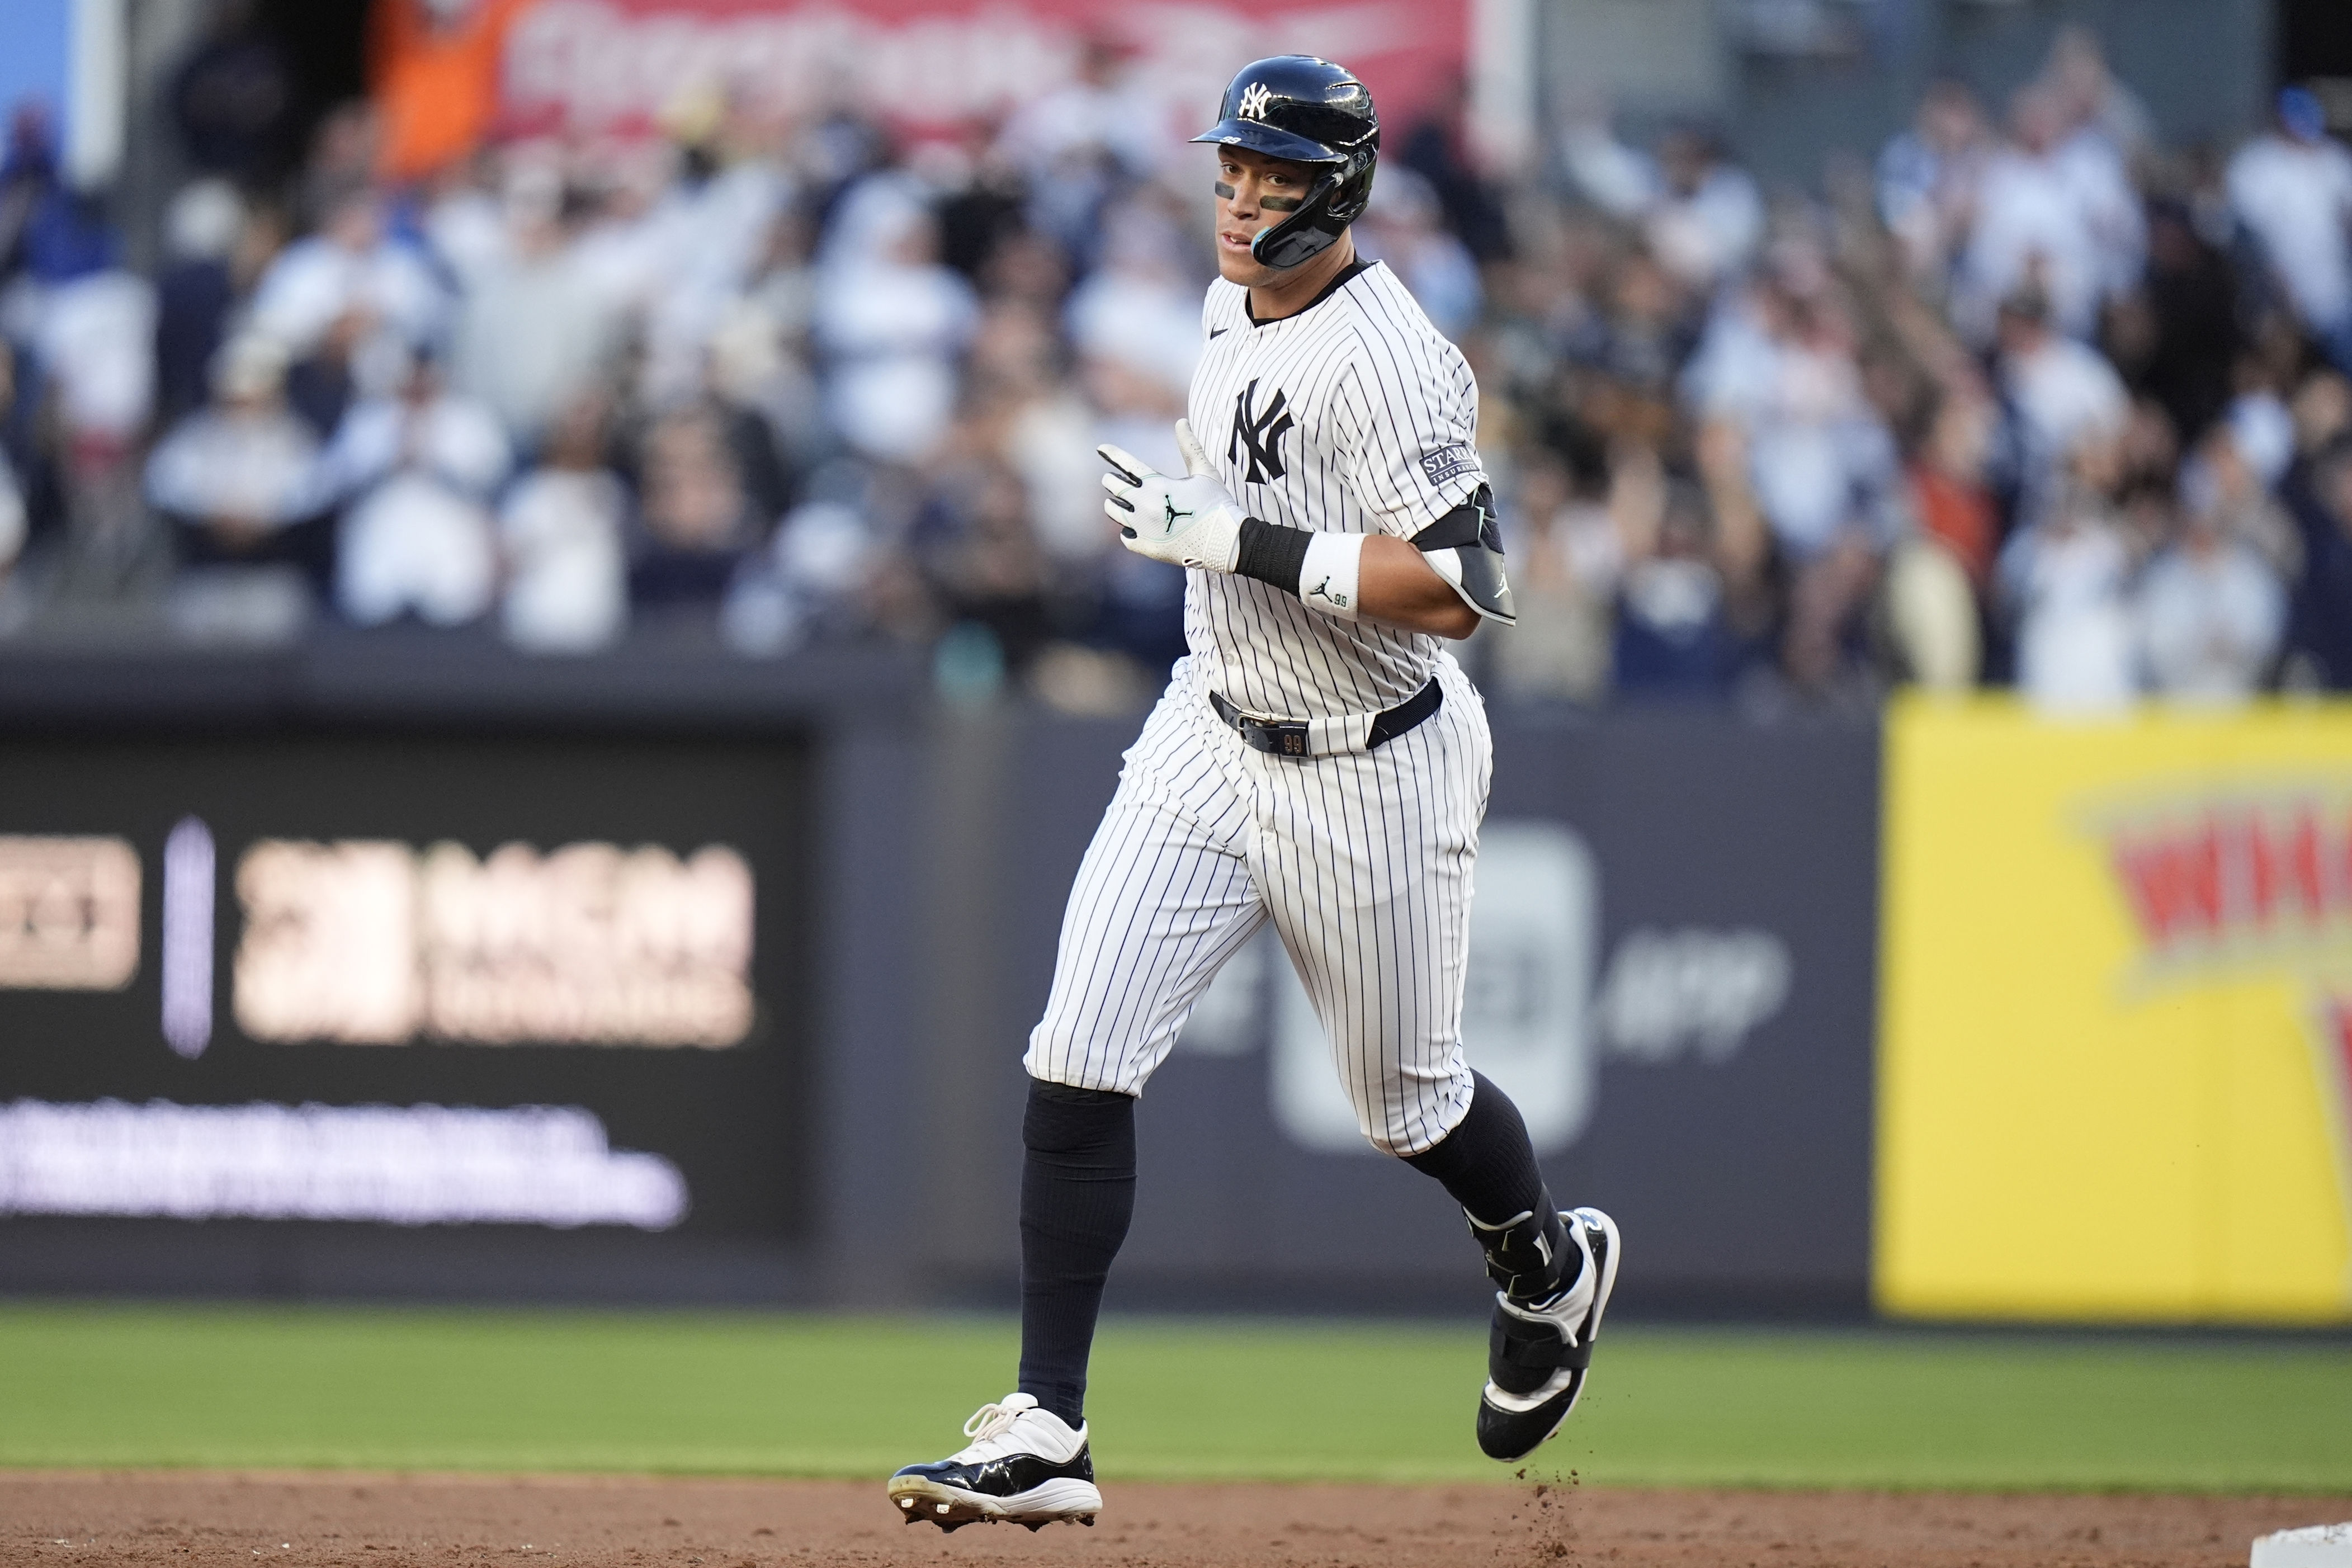 aaron judge homers 1 pitch after joe boyle is called for a balk as yanks top a's 7-3